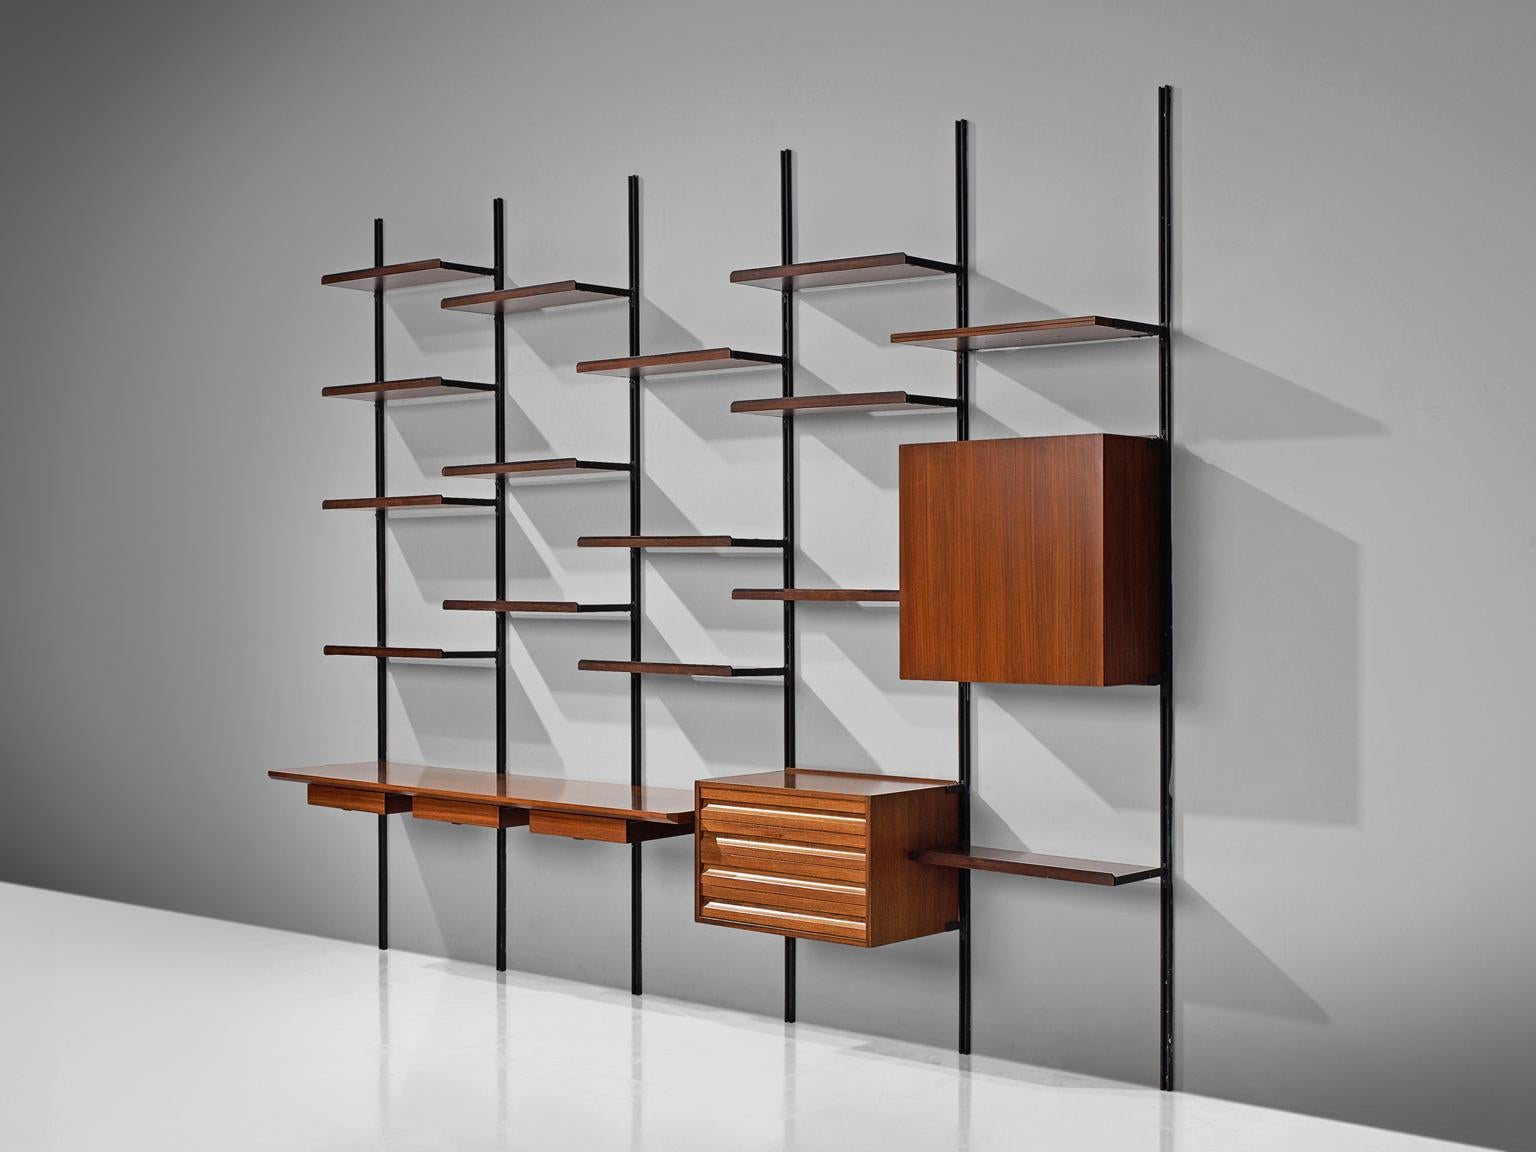 Osvaldo Borsani for Tecno, wall unit E22, metal, Italian walnut, Italy, 1950s.

This wall-mounted shelving unit is five compartments large. This system was developed by Borsani as a coordinated system for furnishing either the home or the office and